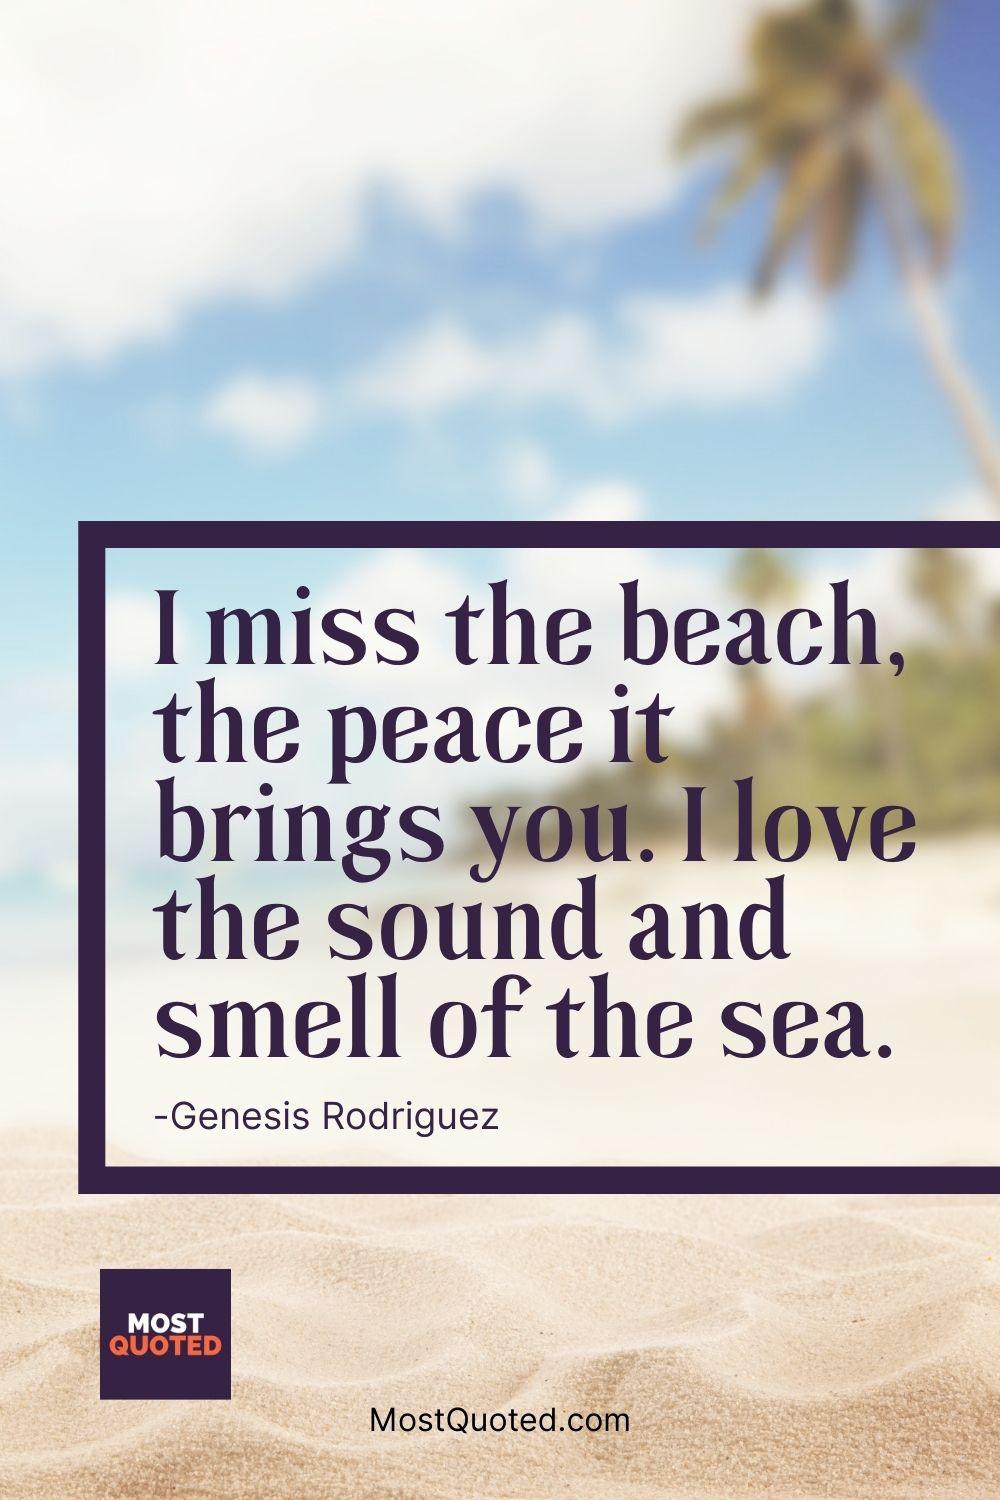 I miss the beach, the peace it brings you. I love the sound and smell of the sea. - Genesis Rodriguez